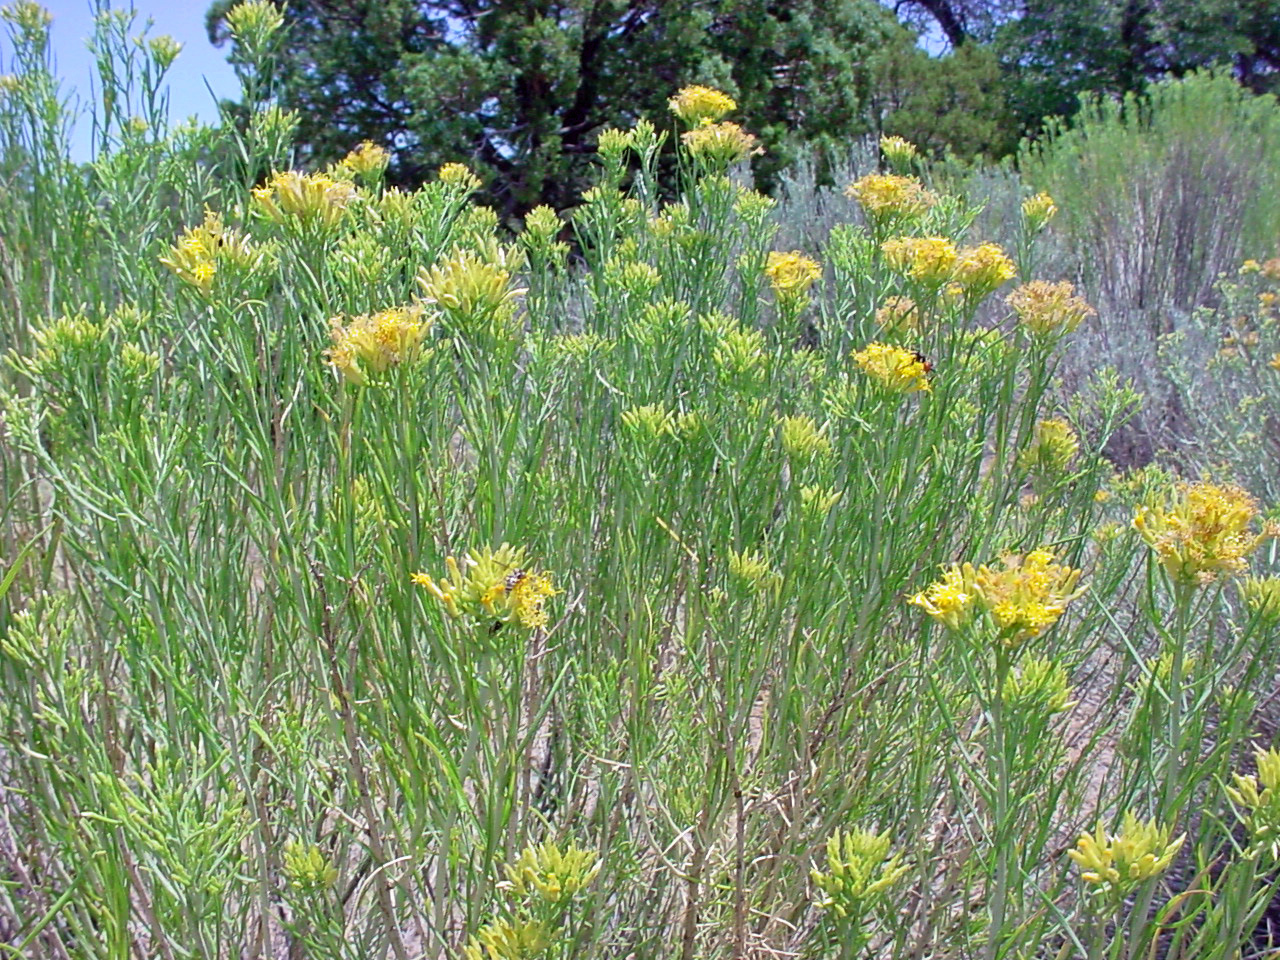 Tall green stems with abundant green narrow leaves and sparse yellow flowerheads.